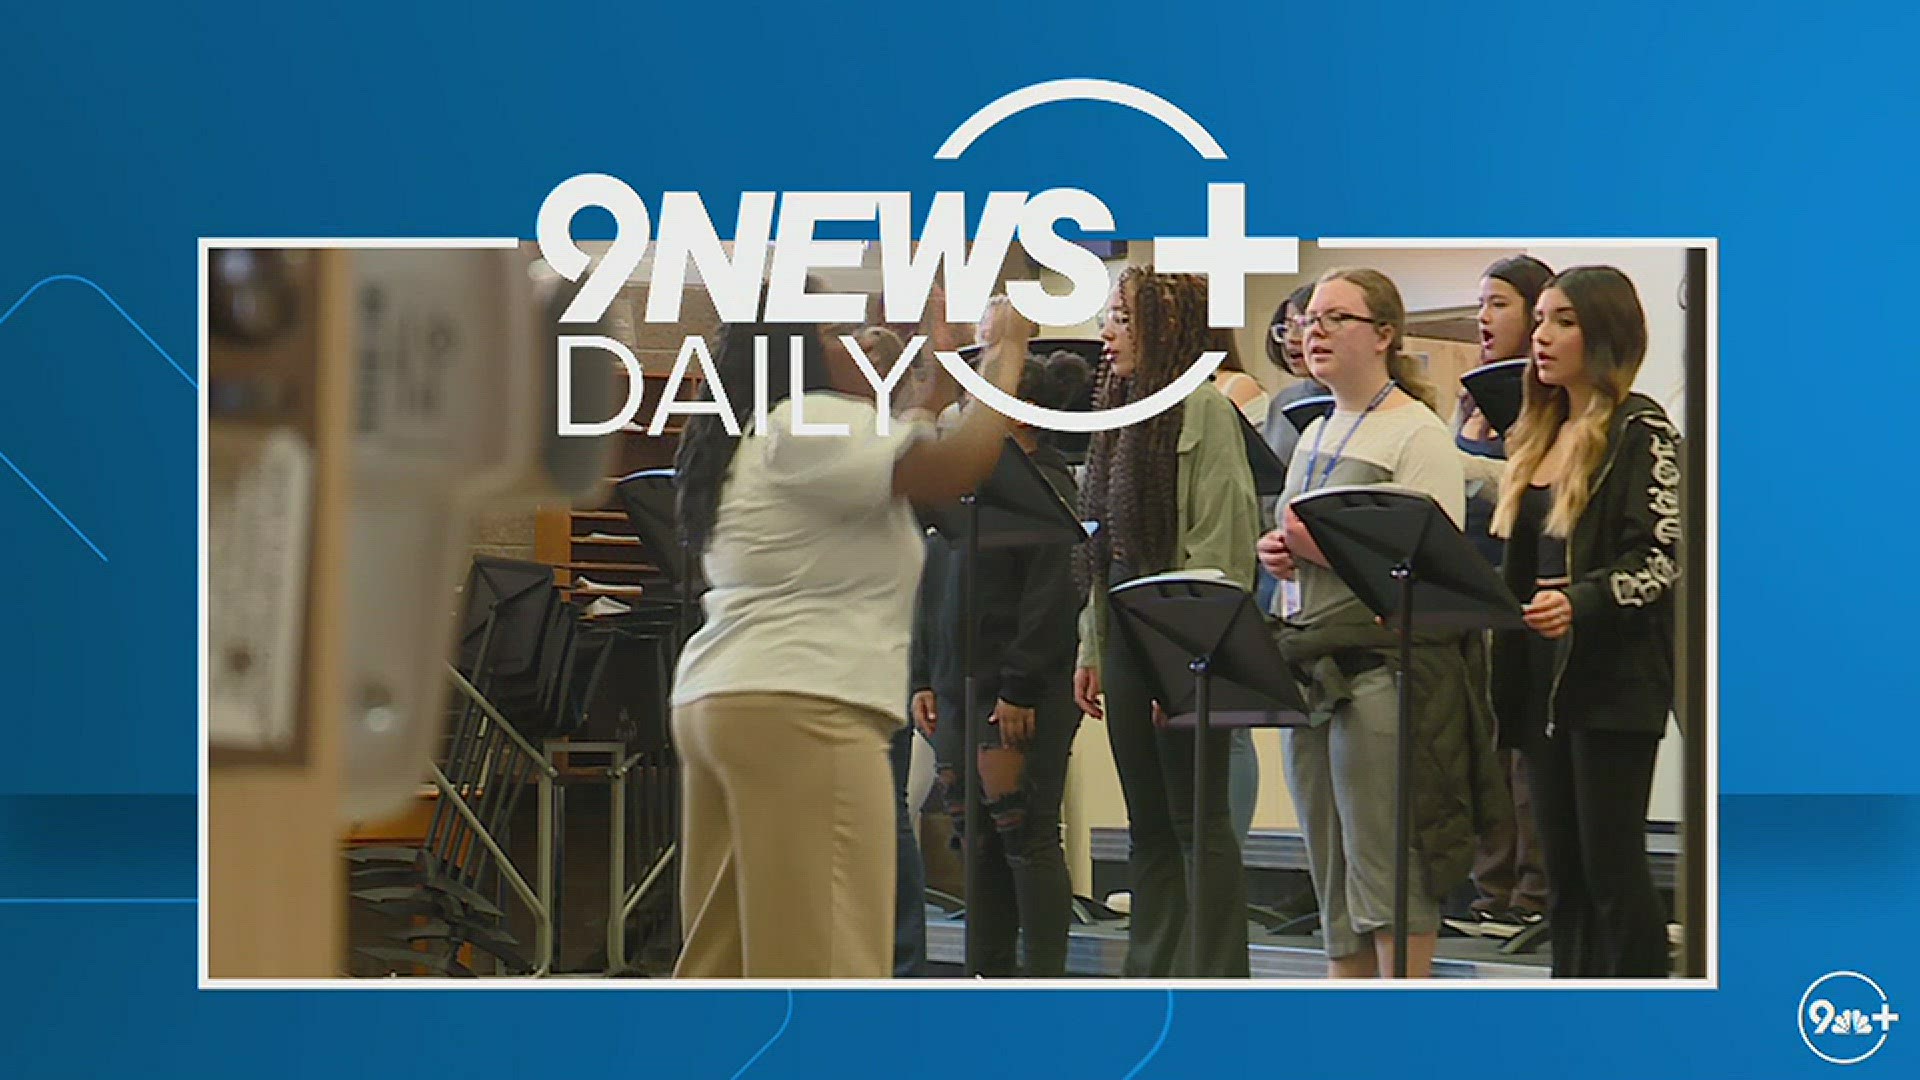 The Colorado Children's Chorale partnered with Maria Ellis, one of only a few Black women conductors in the country, to surprise schools across the Denver area.